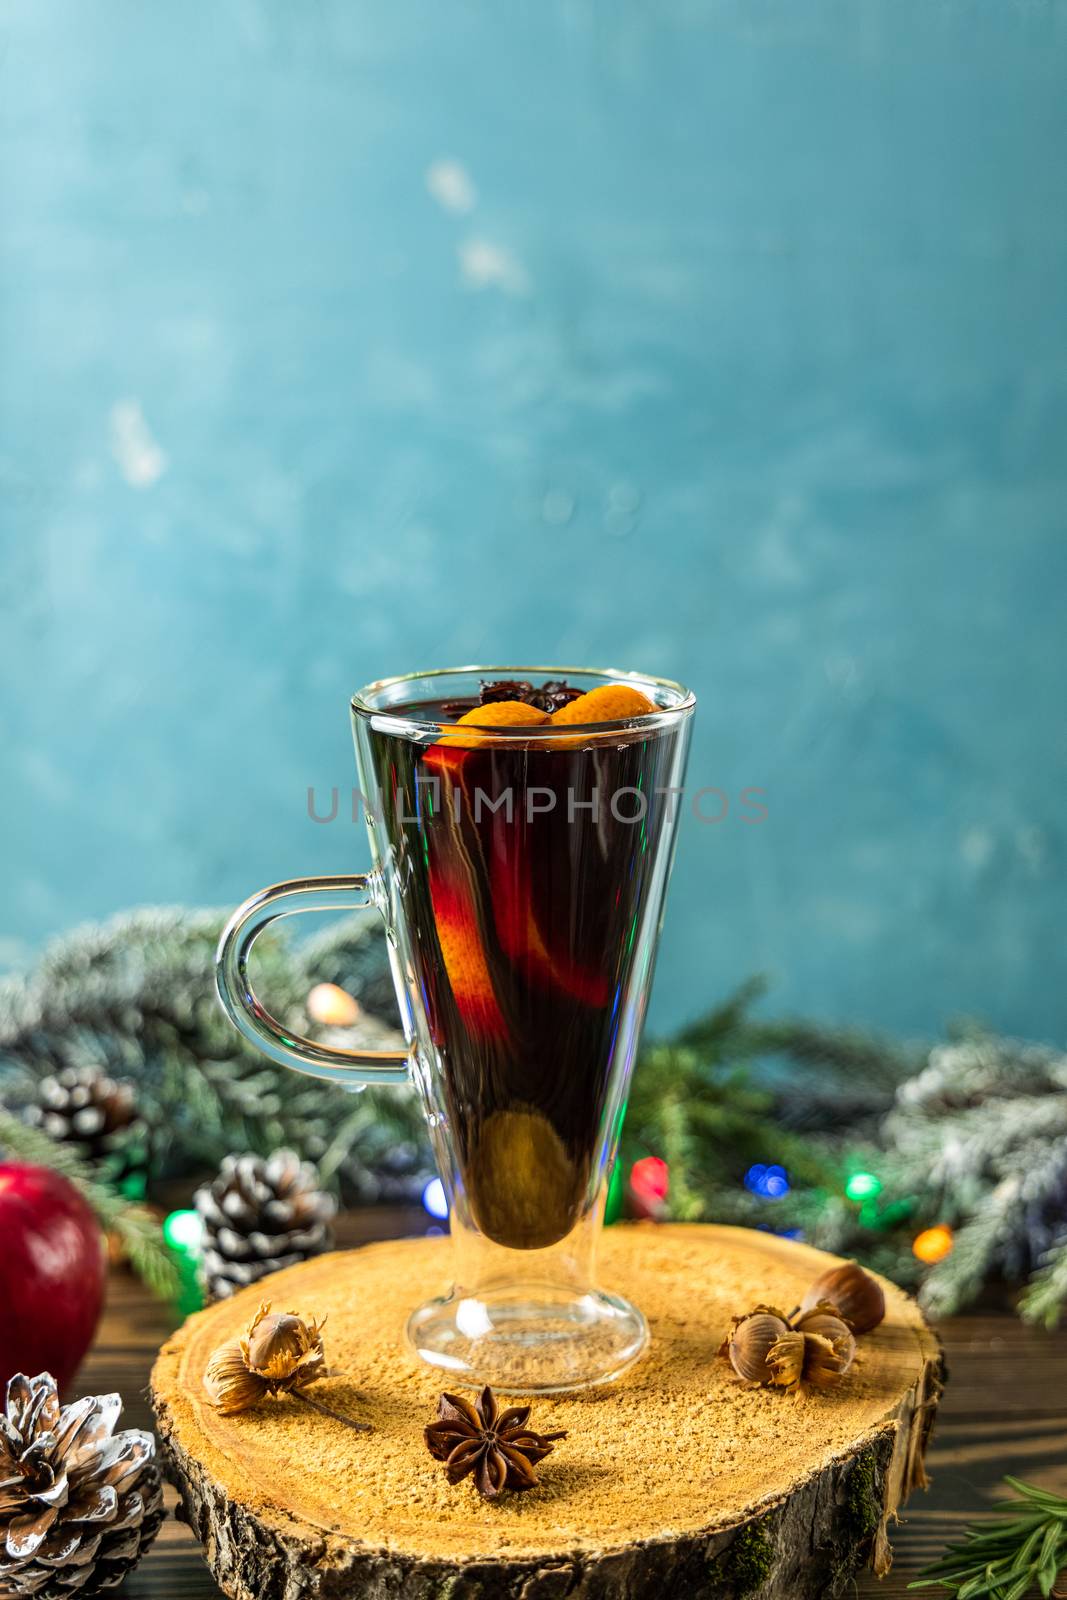 Hot mulled wine drink with orange, apple, cinnamon, anise and other spices in a glass cup between fir tree branches on wooden cutting board